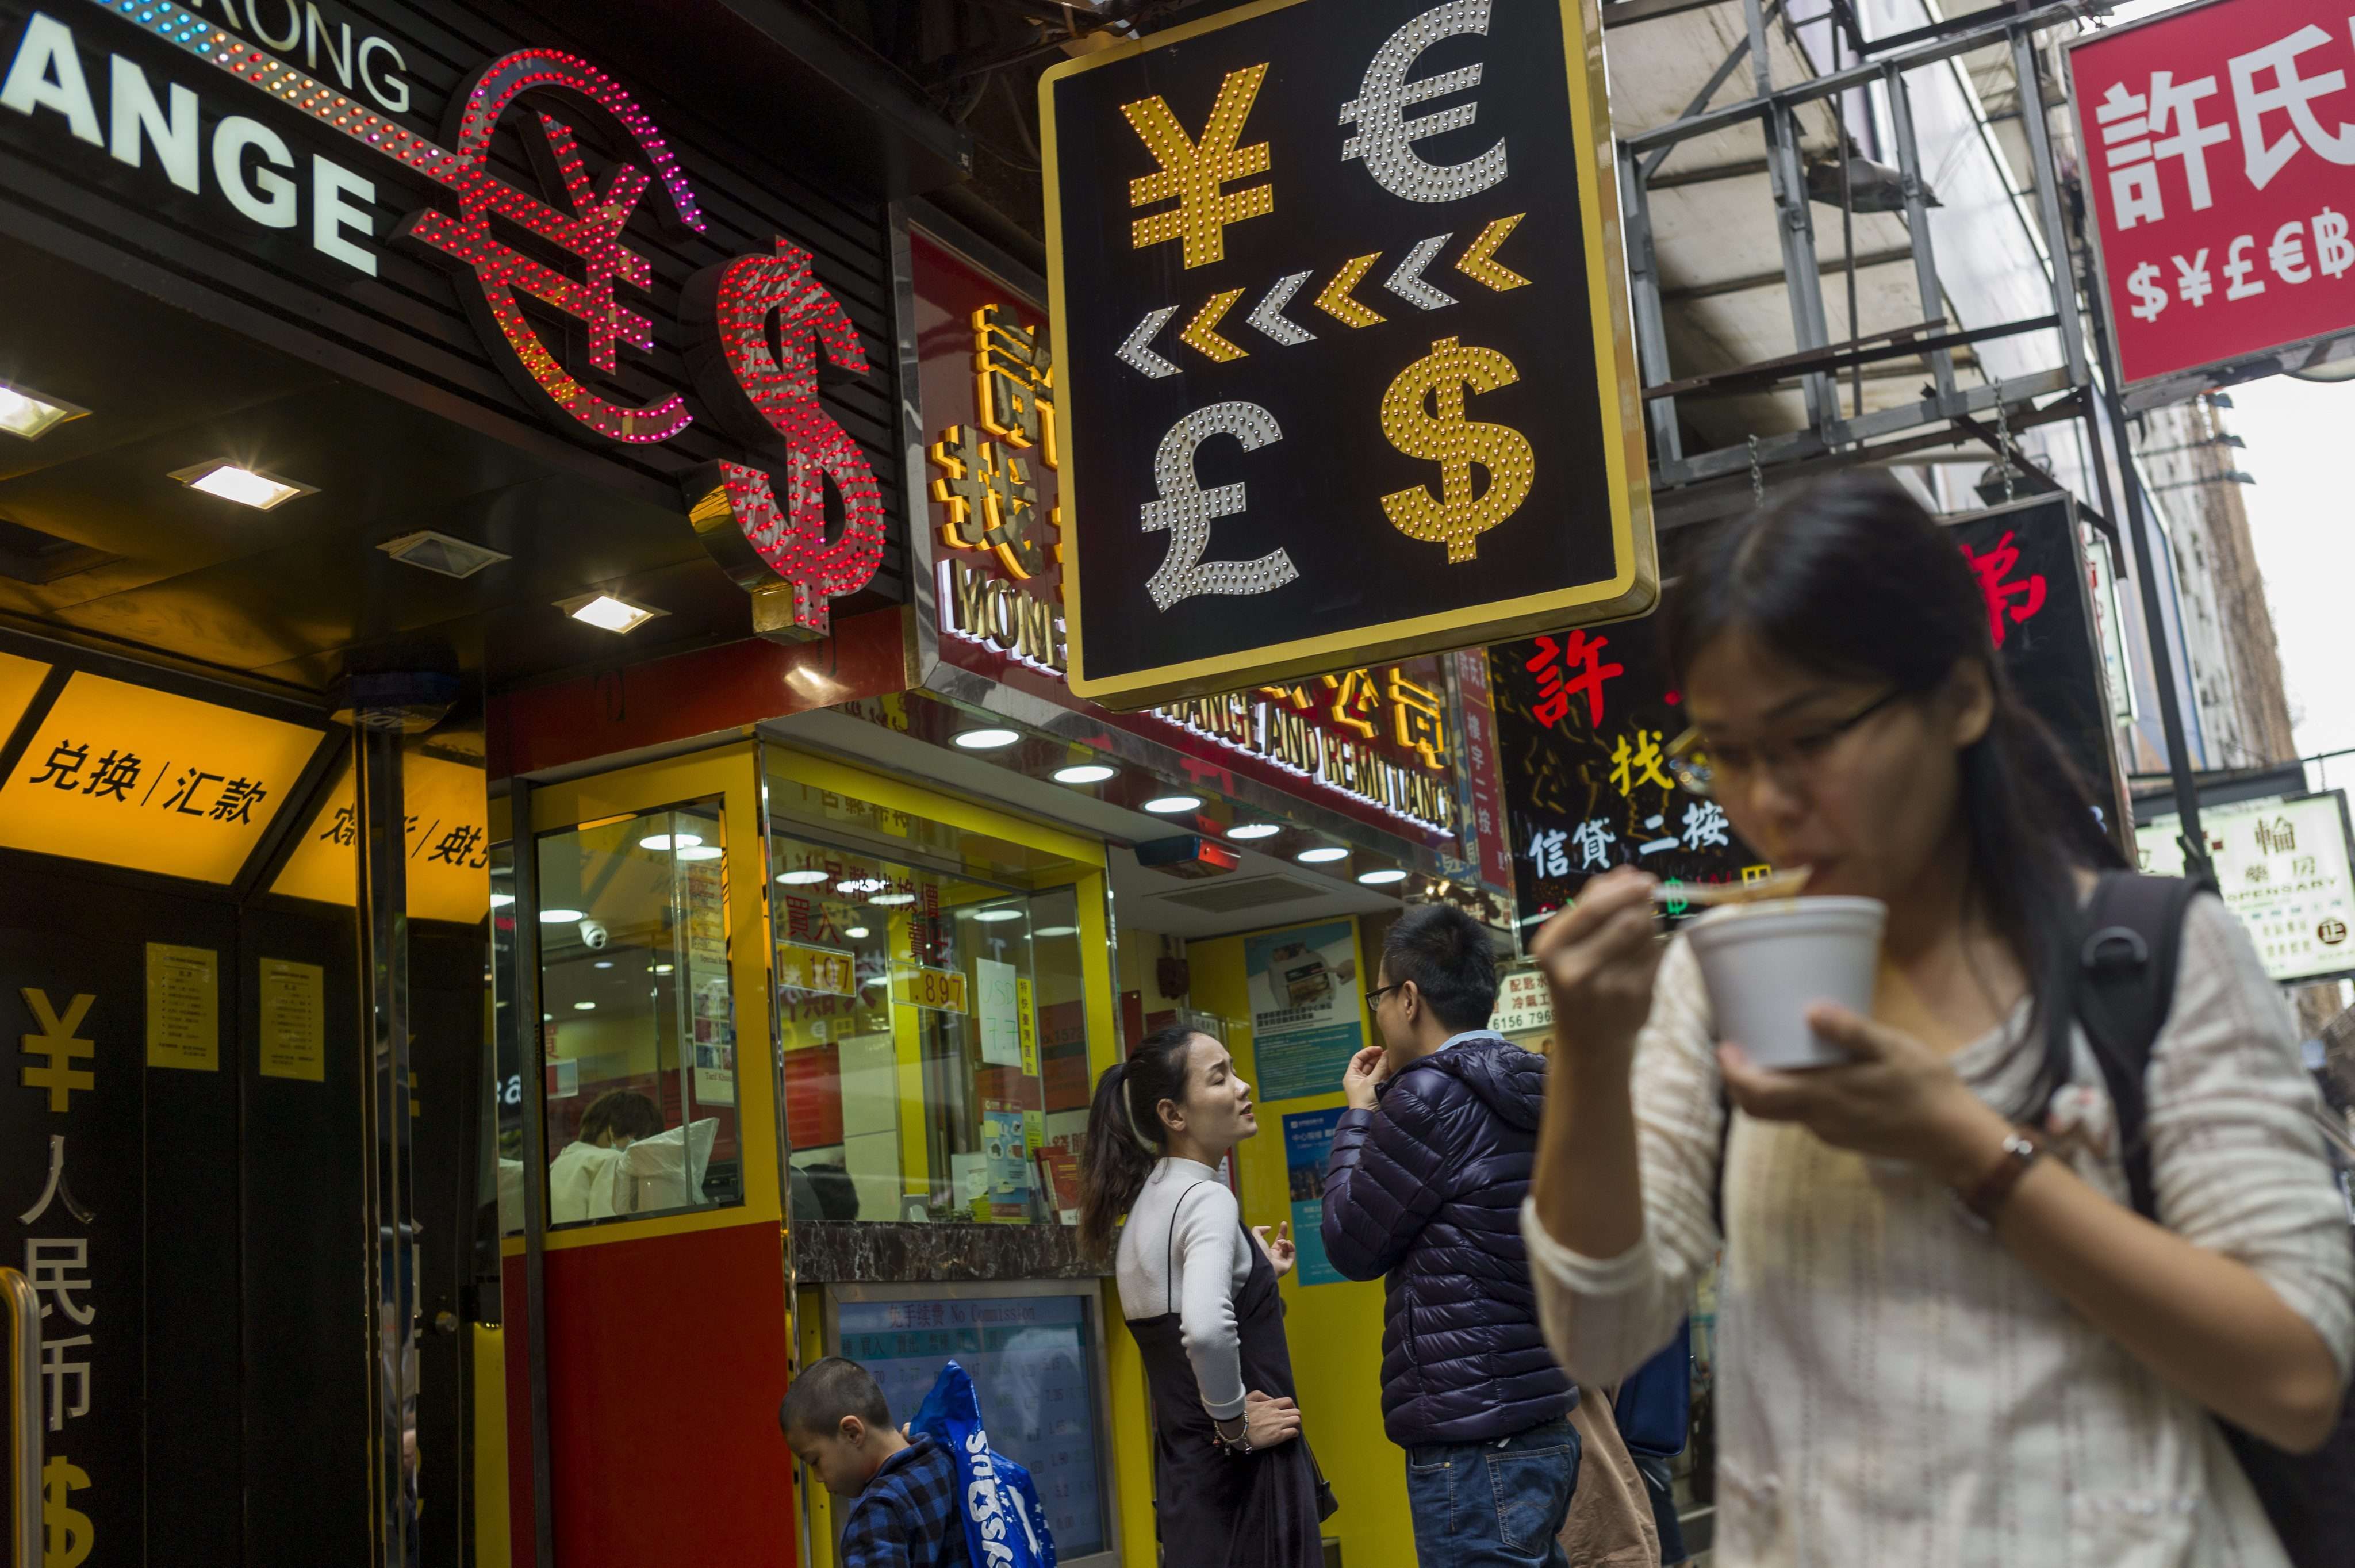 A woman eats instant noodles next to a currency exchange shop in Causeway Bay. Over the past decade, the average income of Hong Kong’s white-collar workers has remained largely unchanged while living costs have surged. As a result, their standard of living has declined. Photo: EPA